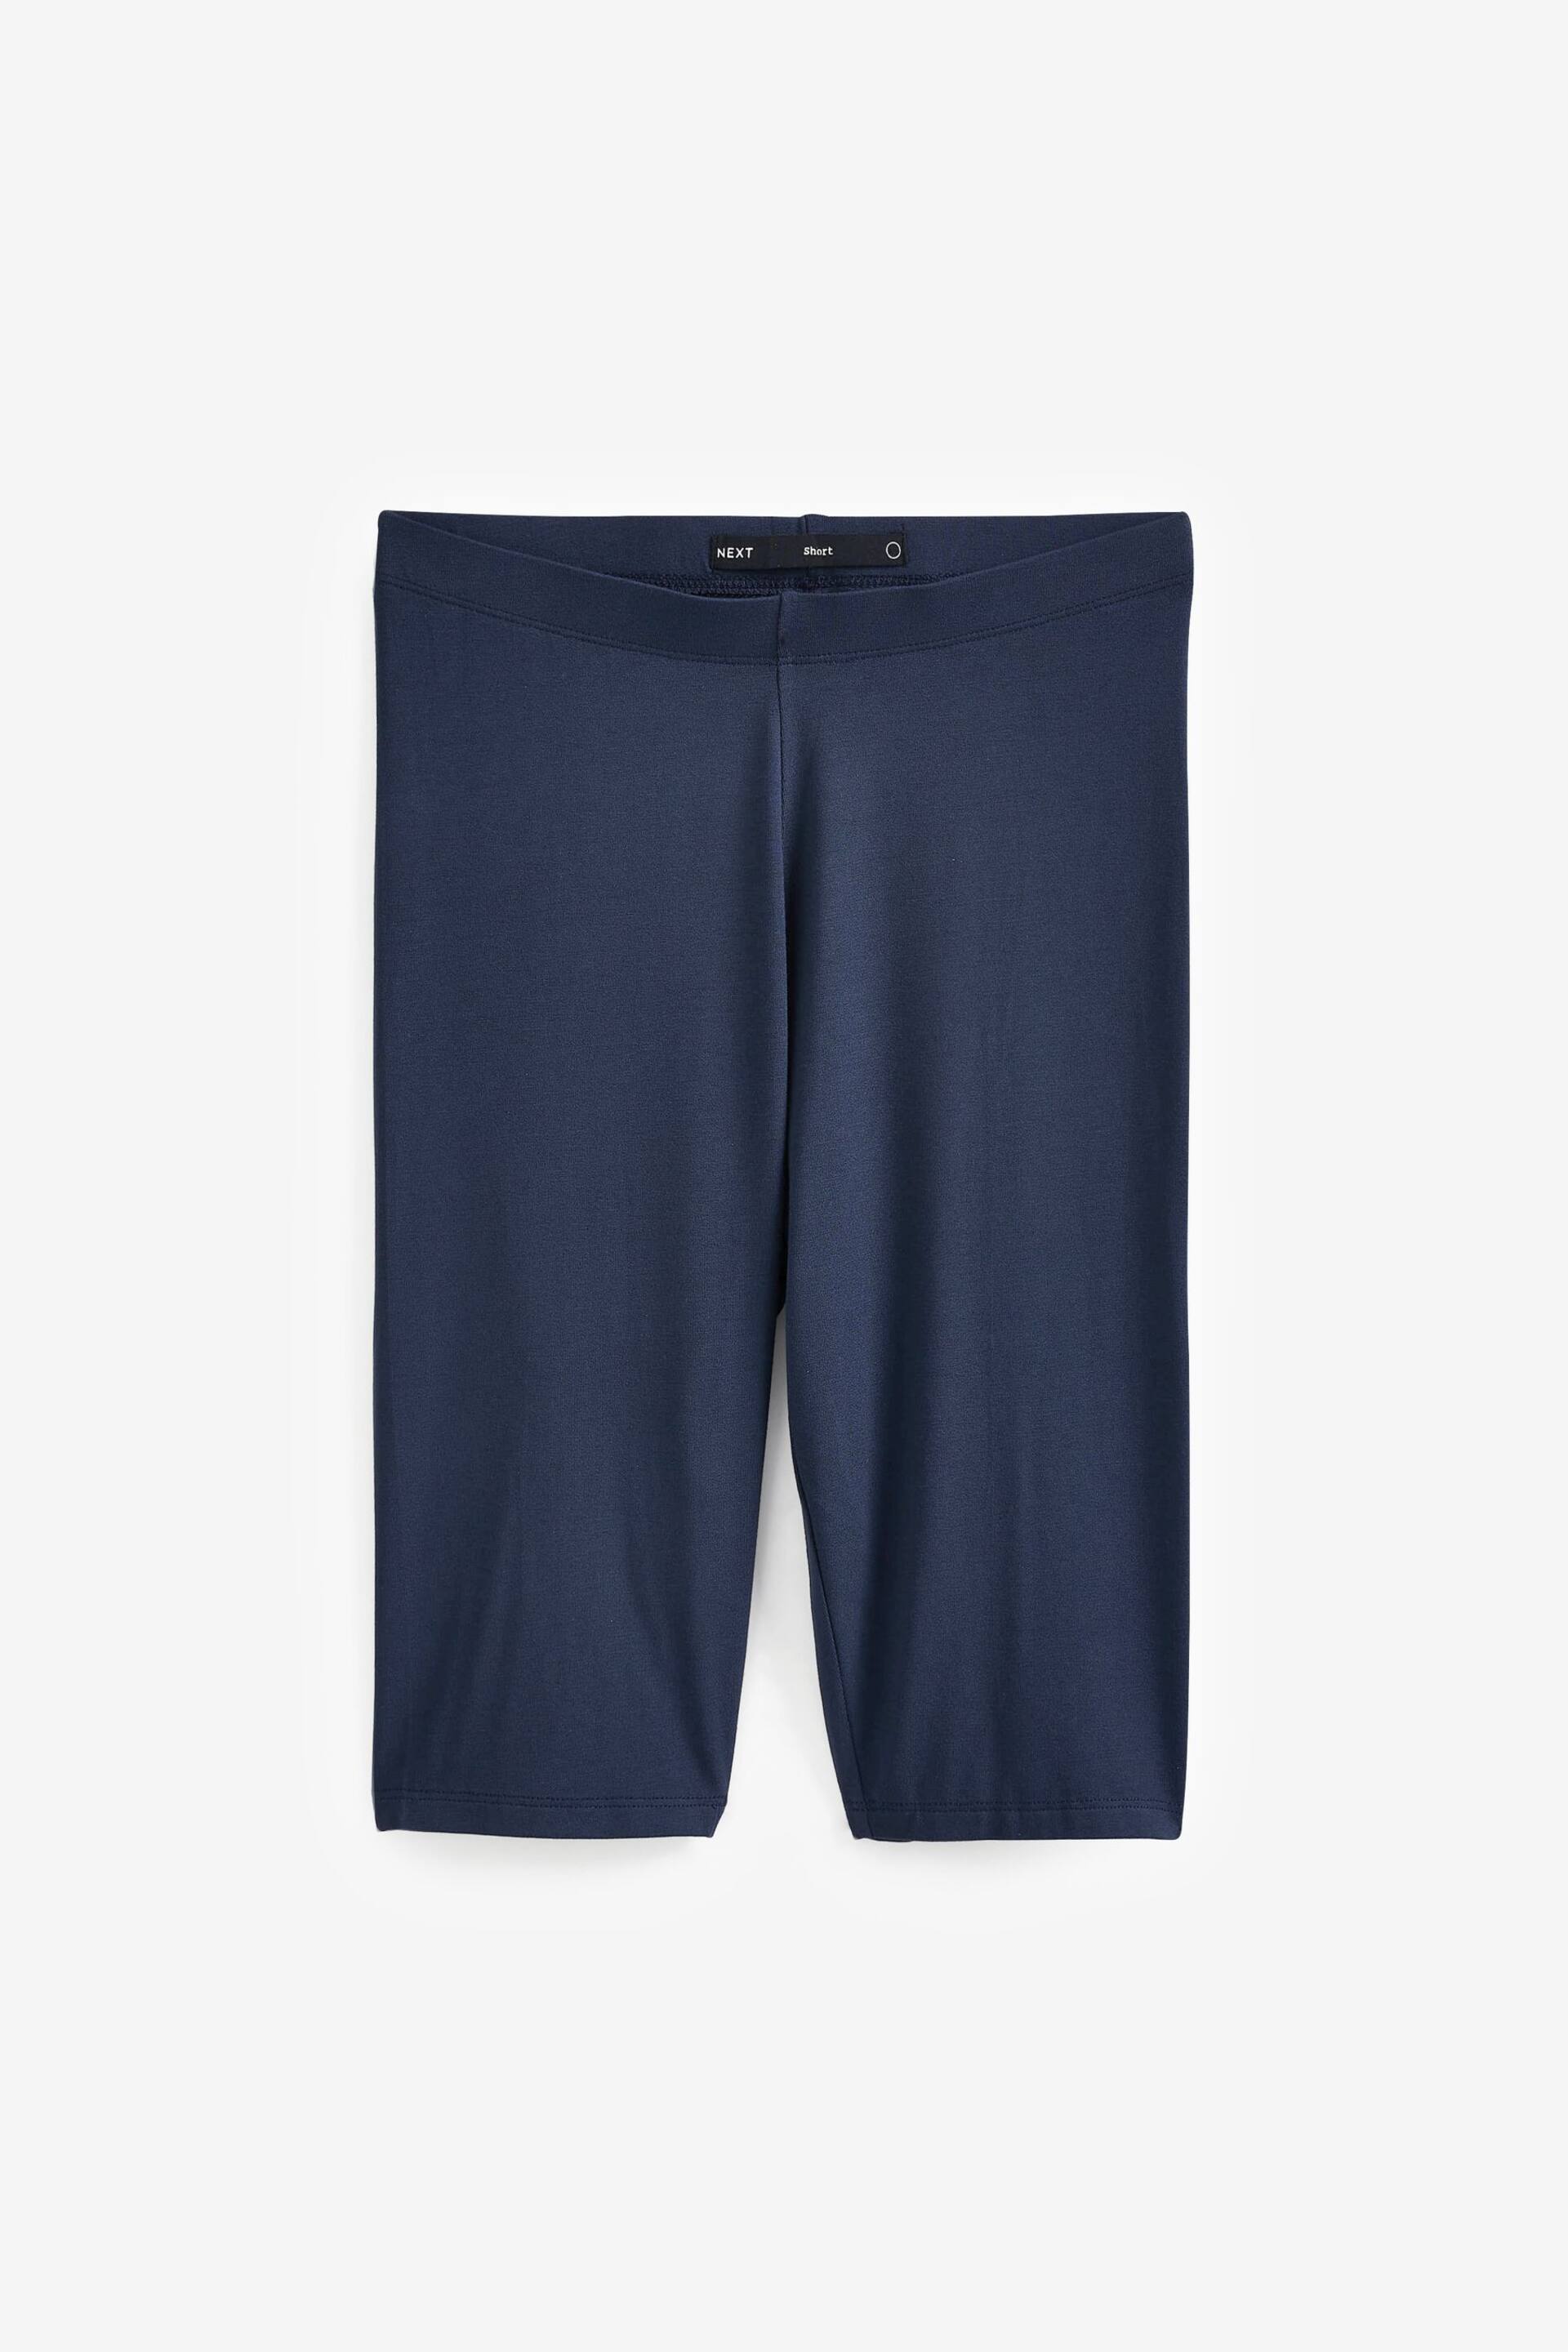 Navy Jersey Cycle Shorts - Image 7 of 8